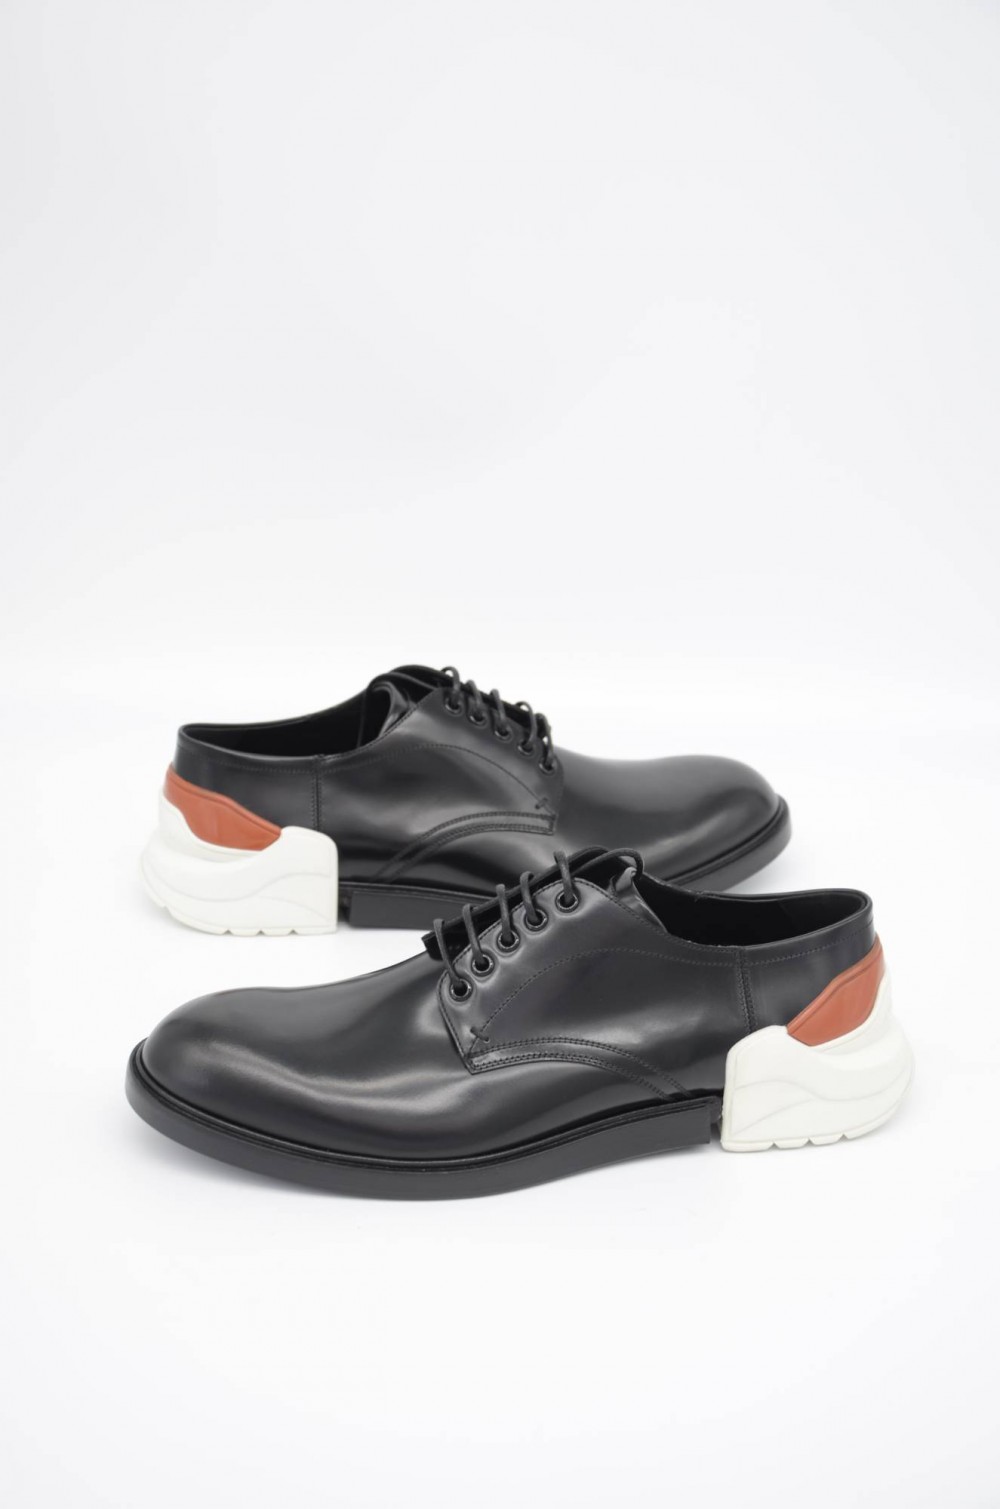 dolce and gabbana dress shoes